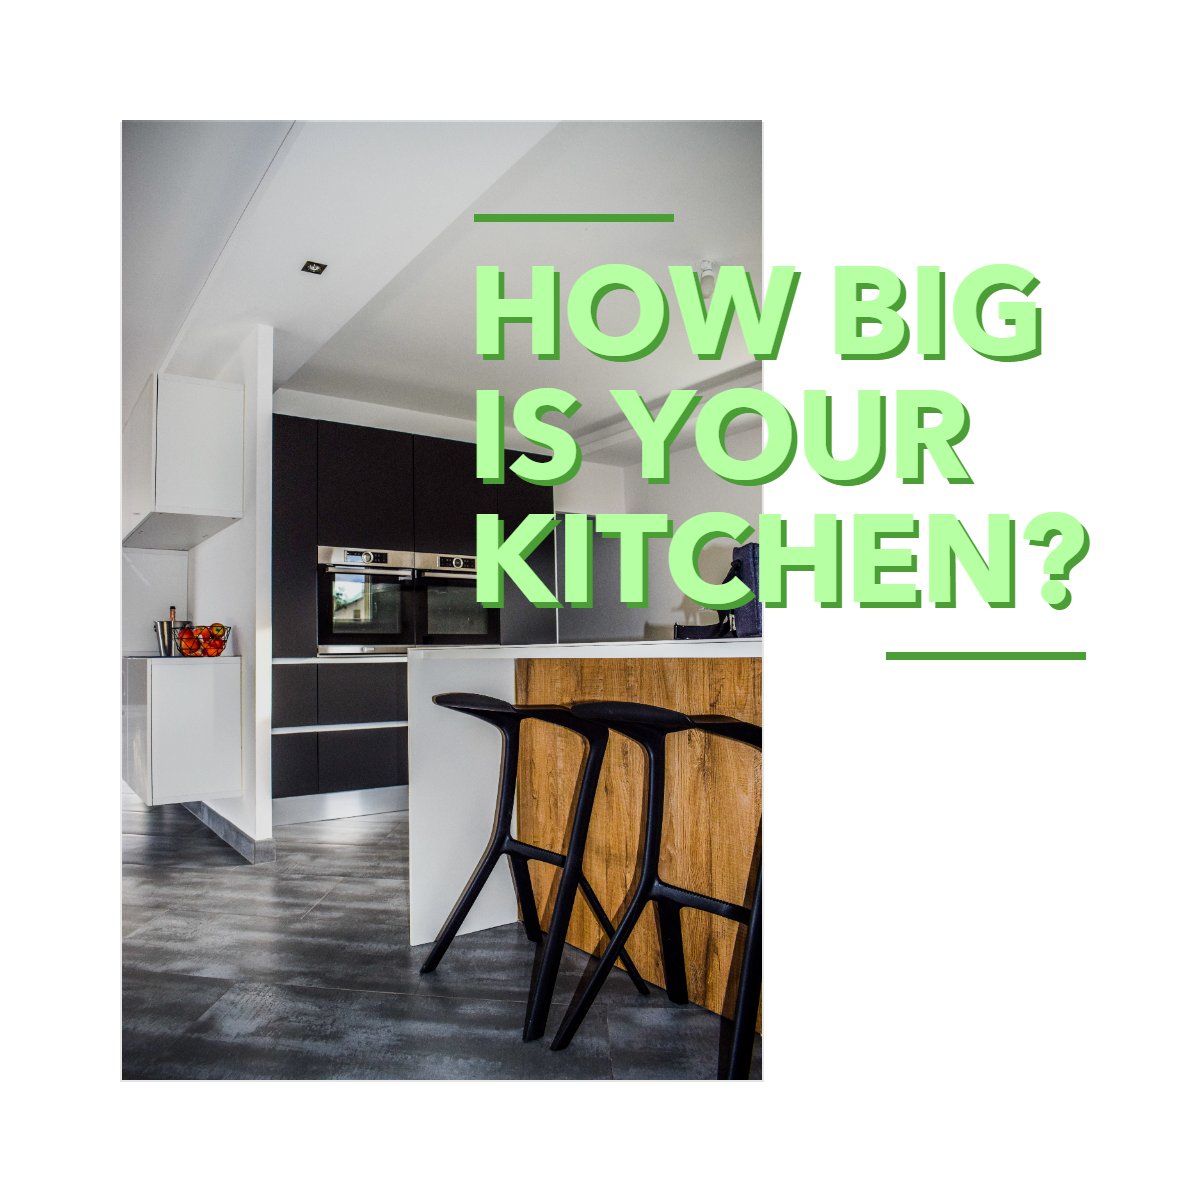 In the US the average Kitchen size for single homes is 161 square feet 😲

How big is your kitchen Tell us in the comments!  👇

#realestate #kitchensize #kitchen #homes